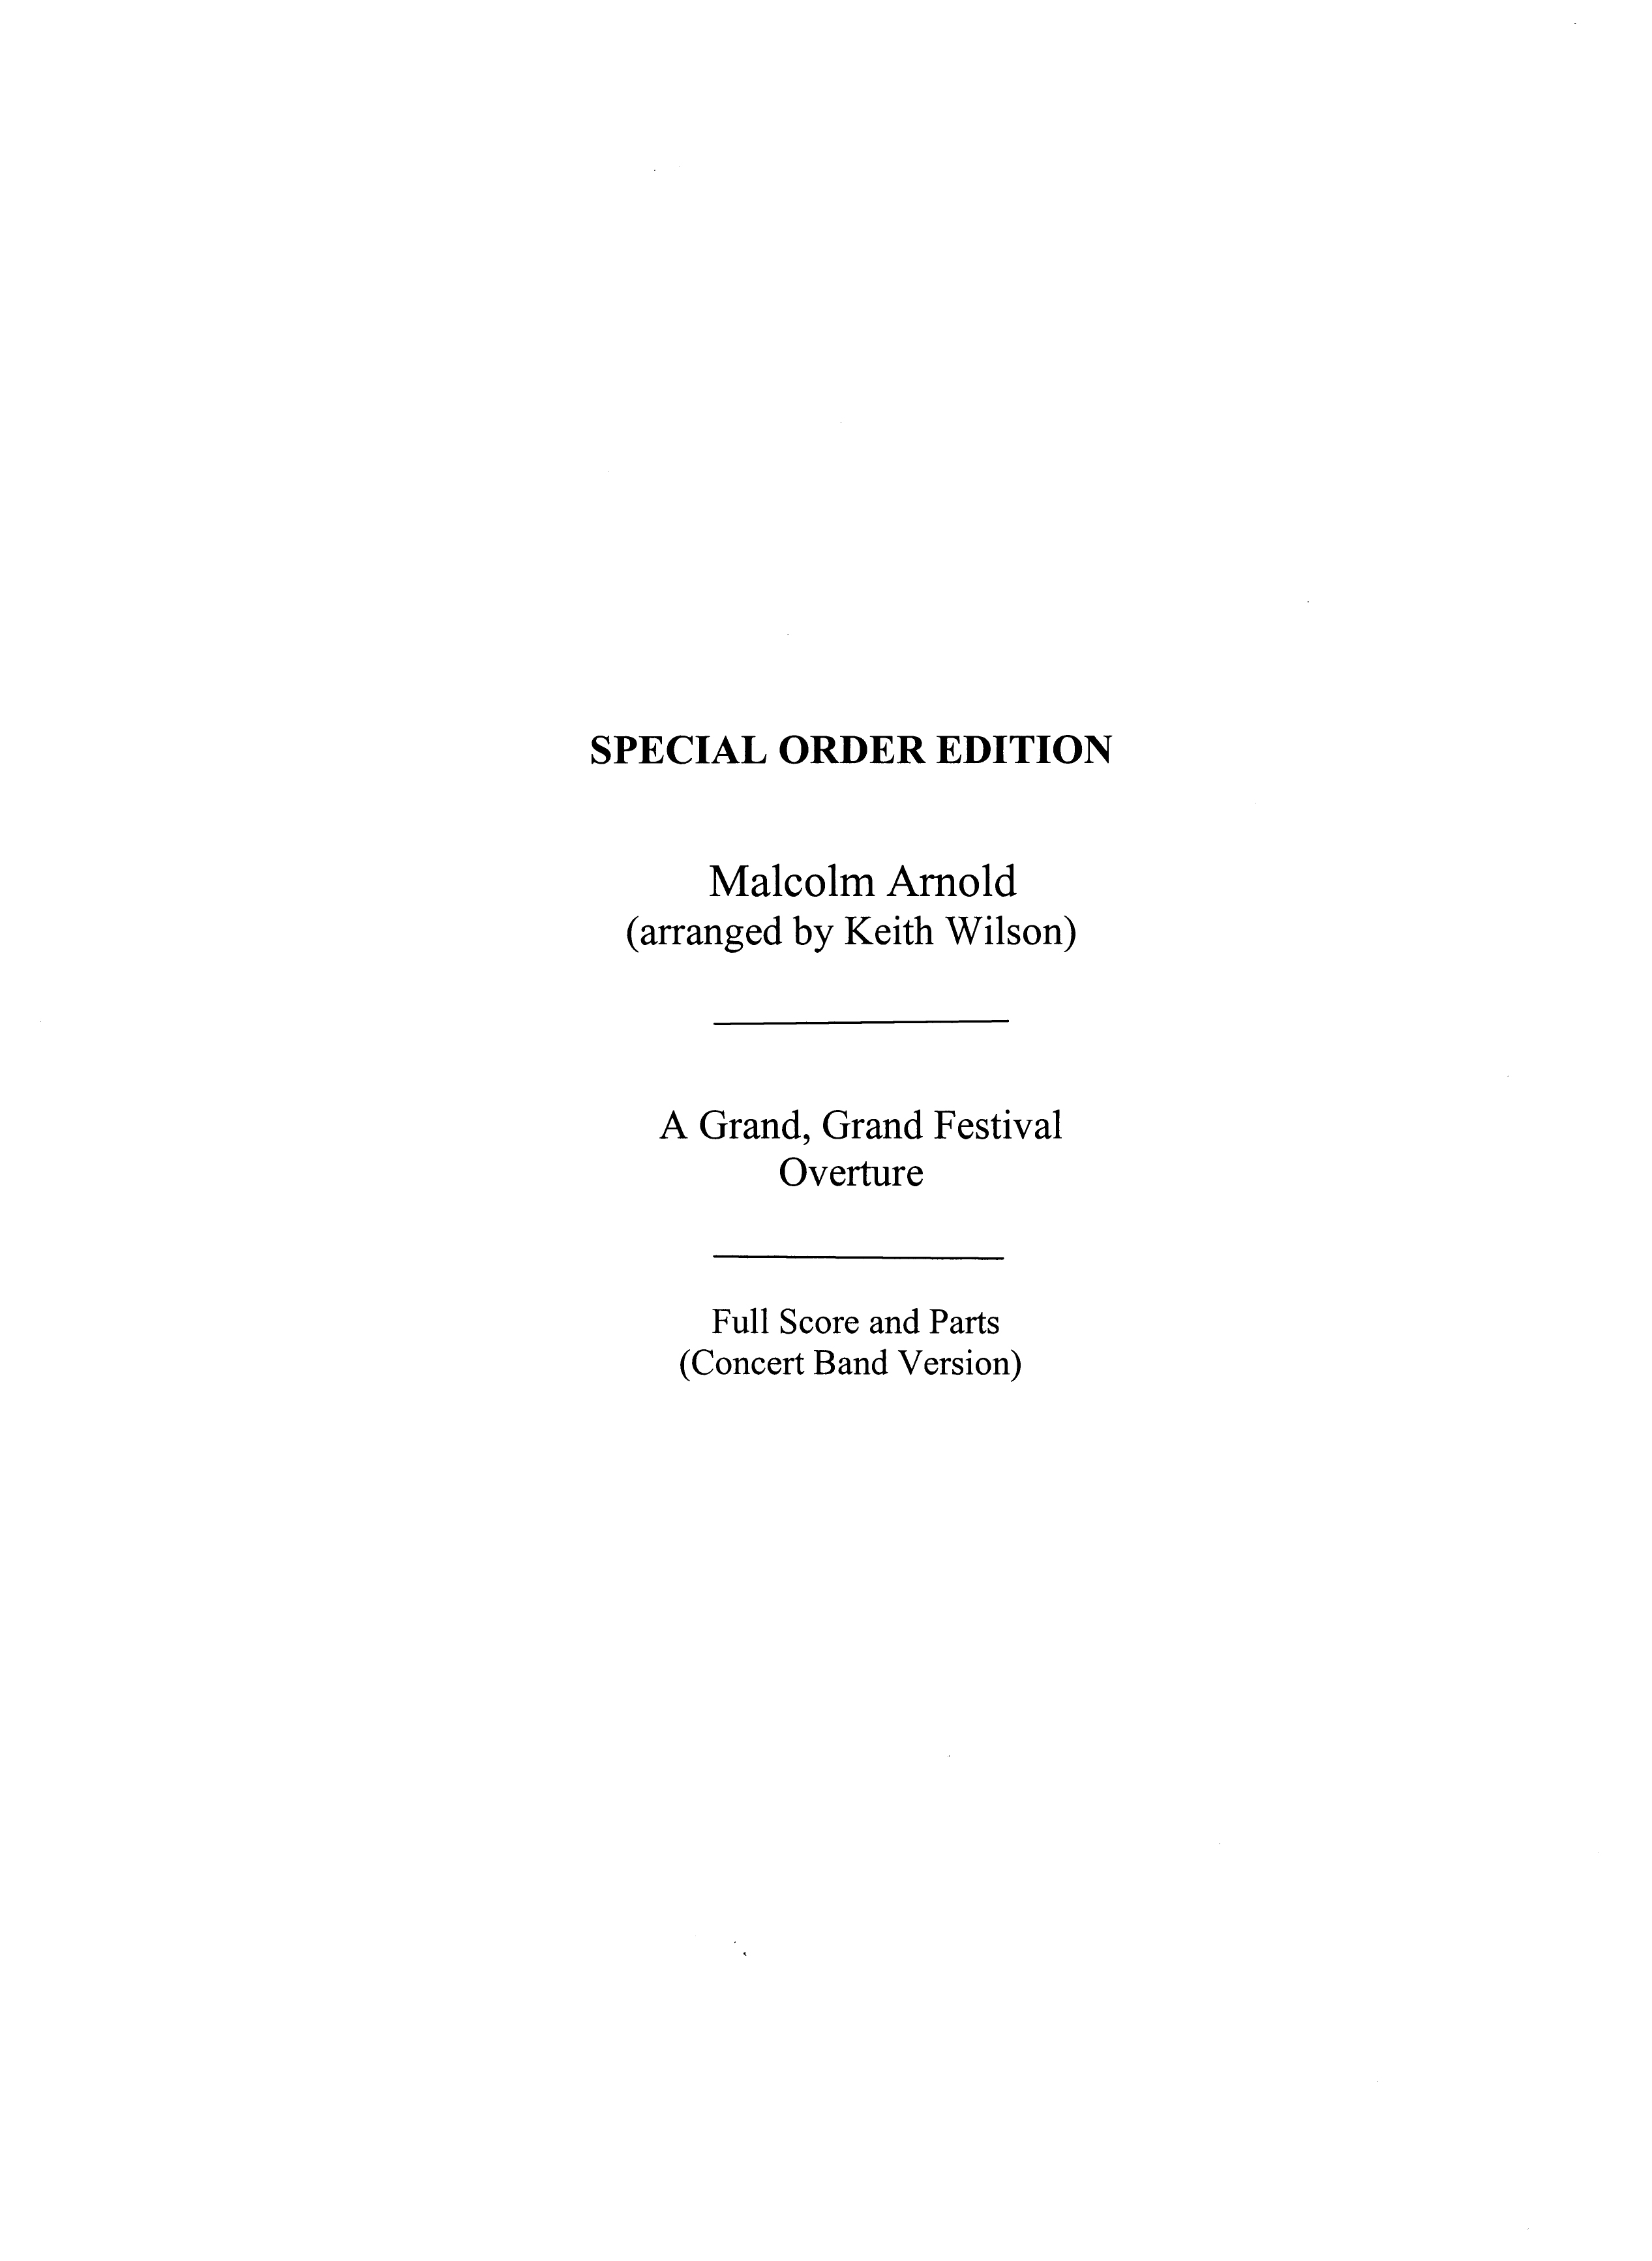 Malcolm Arnold: A Grand Grand Overture: Concert Band: Score and Parts